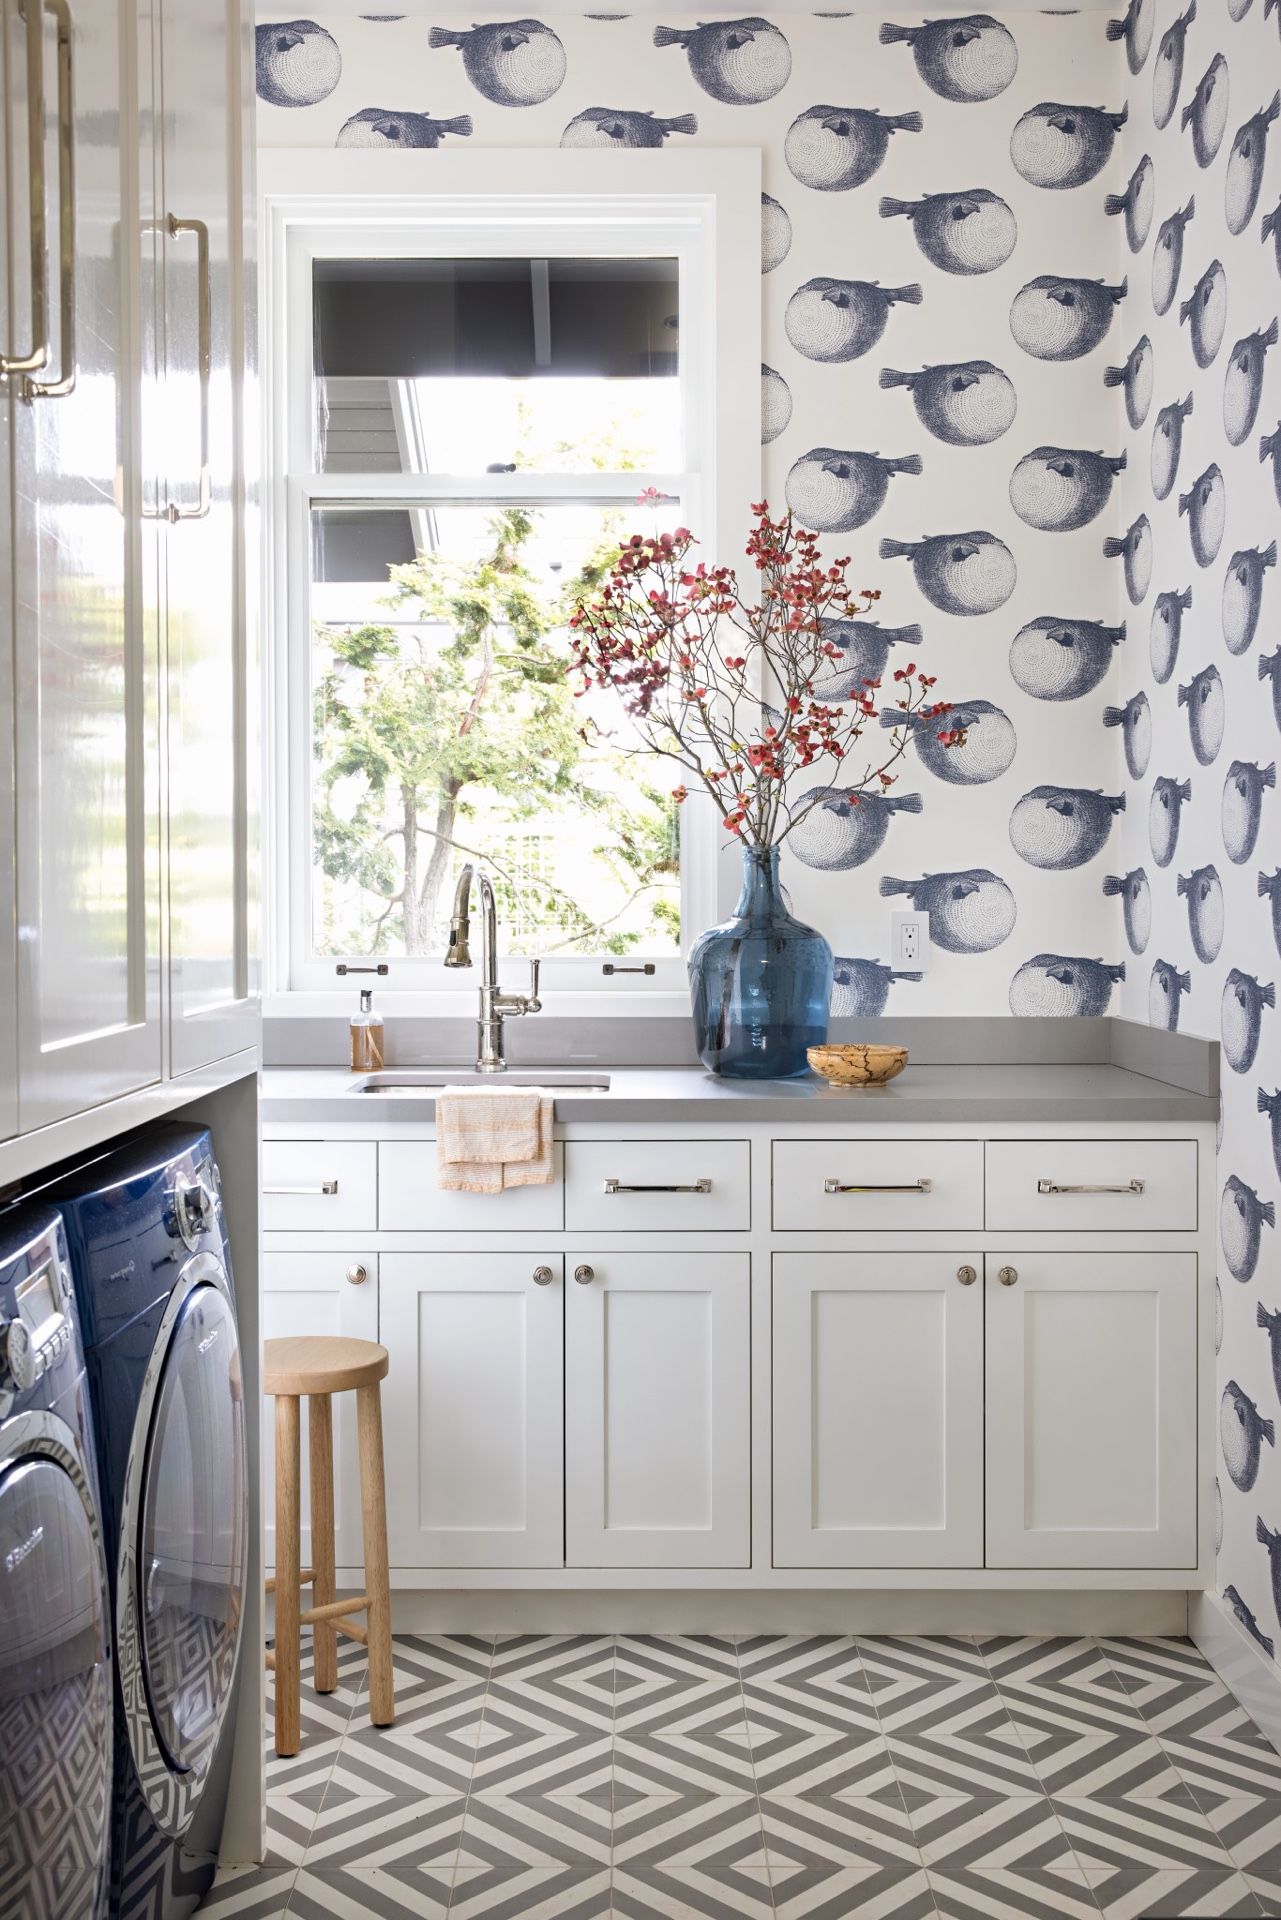 Laundry Room With Whimsical Butterfly Wallpaper  HGTV